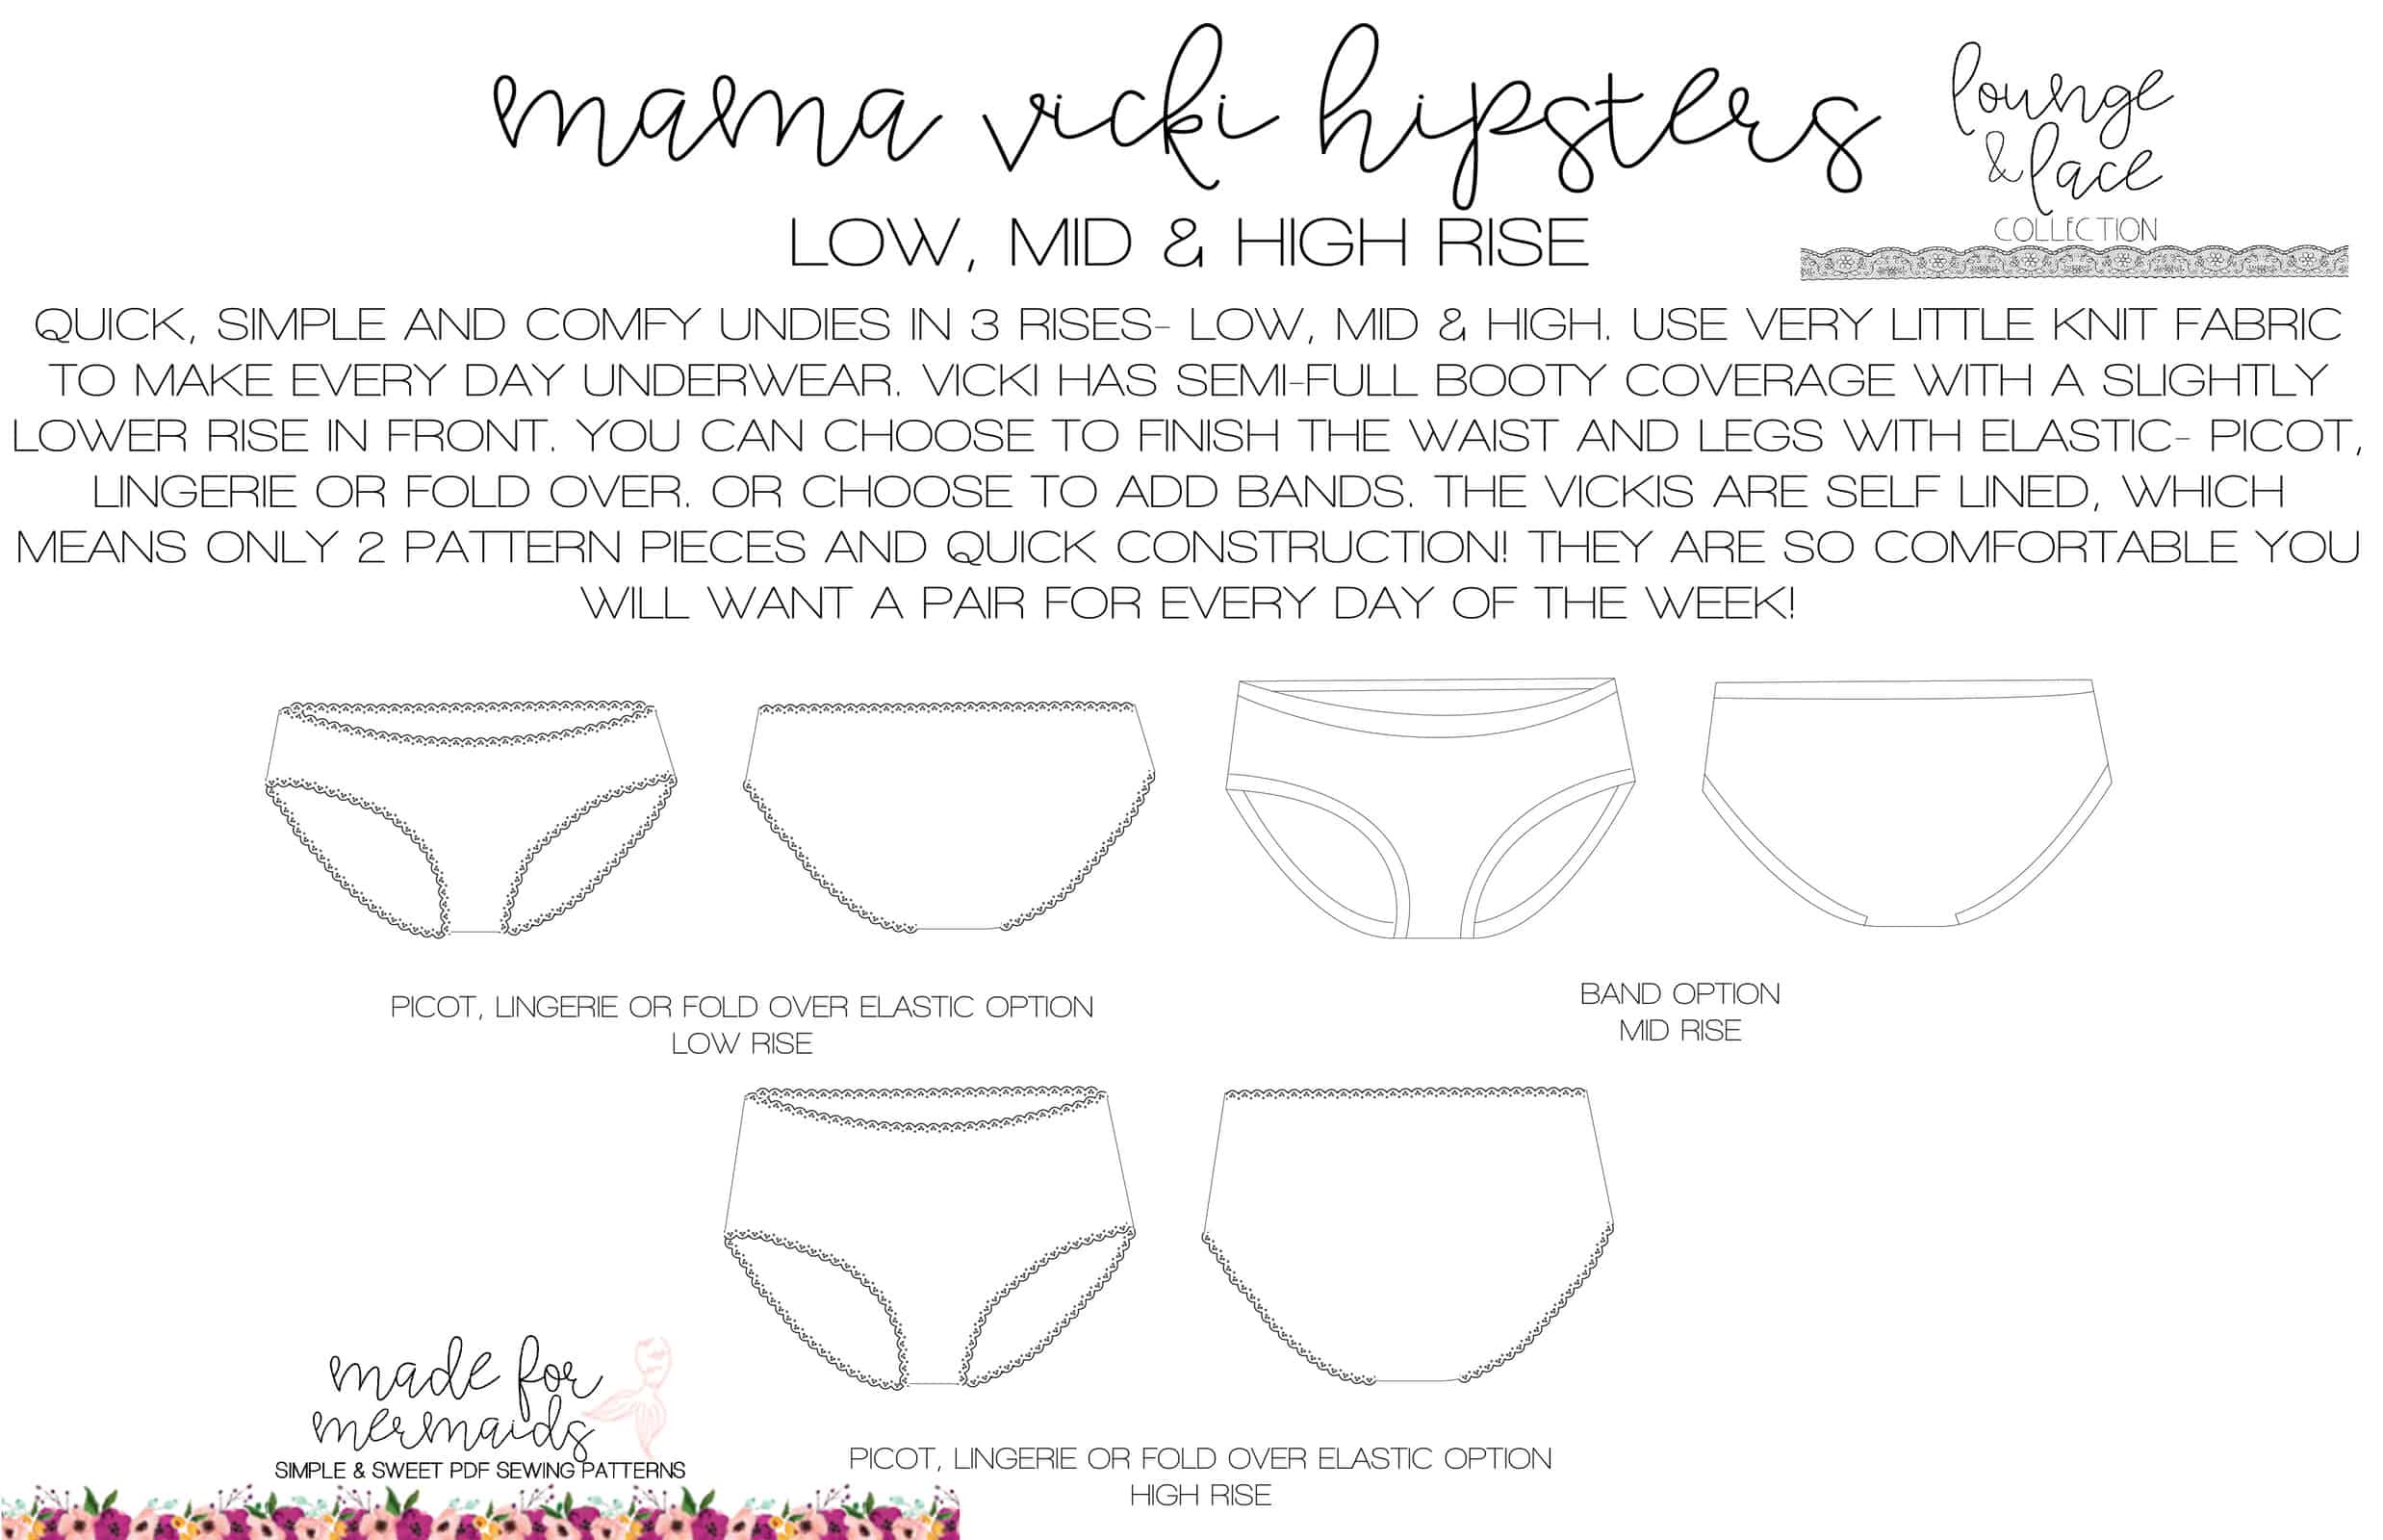 Lounge & Lace Collection- Women's Vicki Hipsters